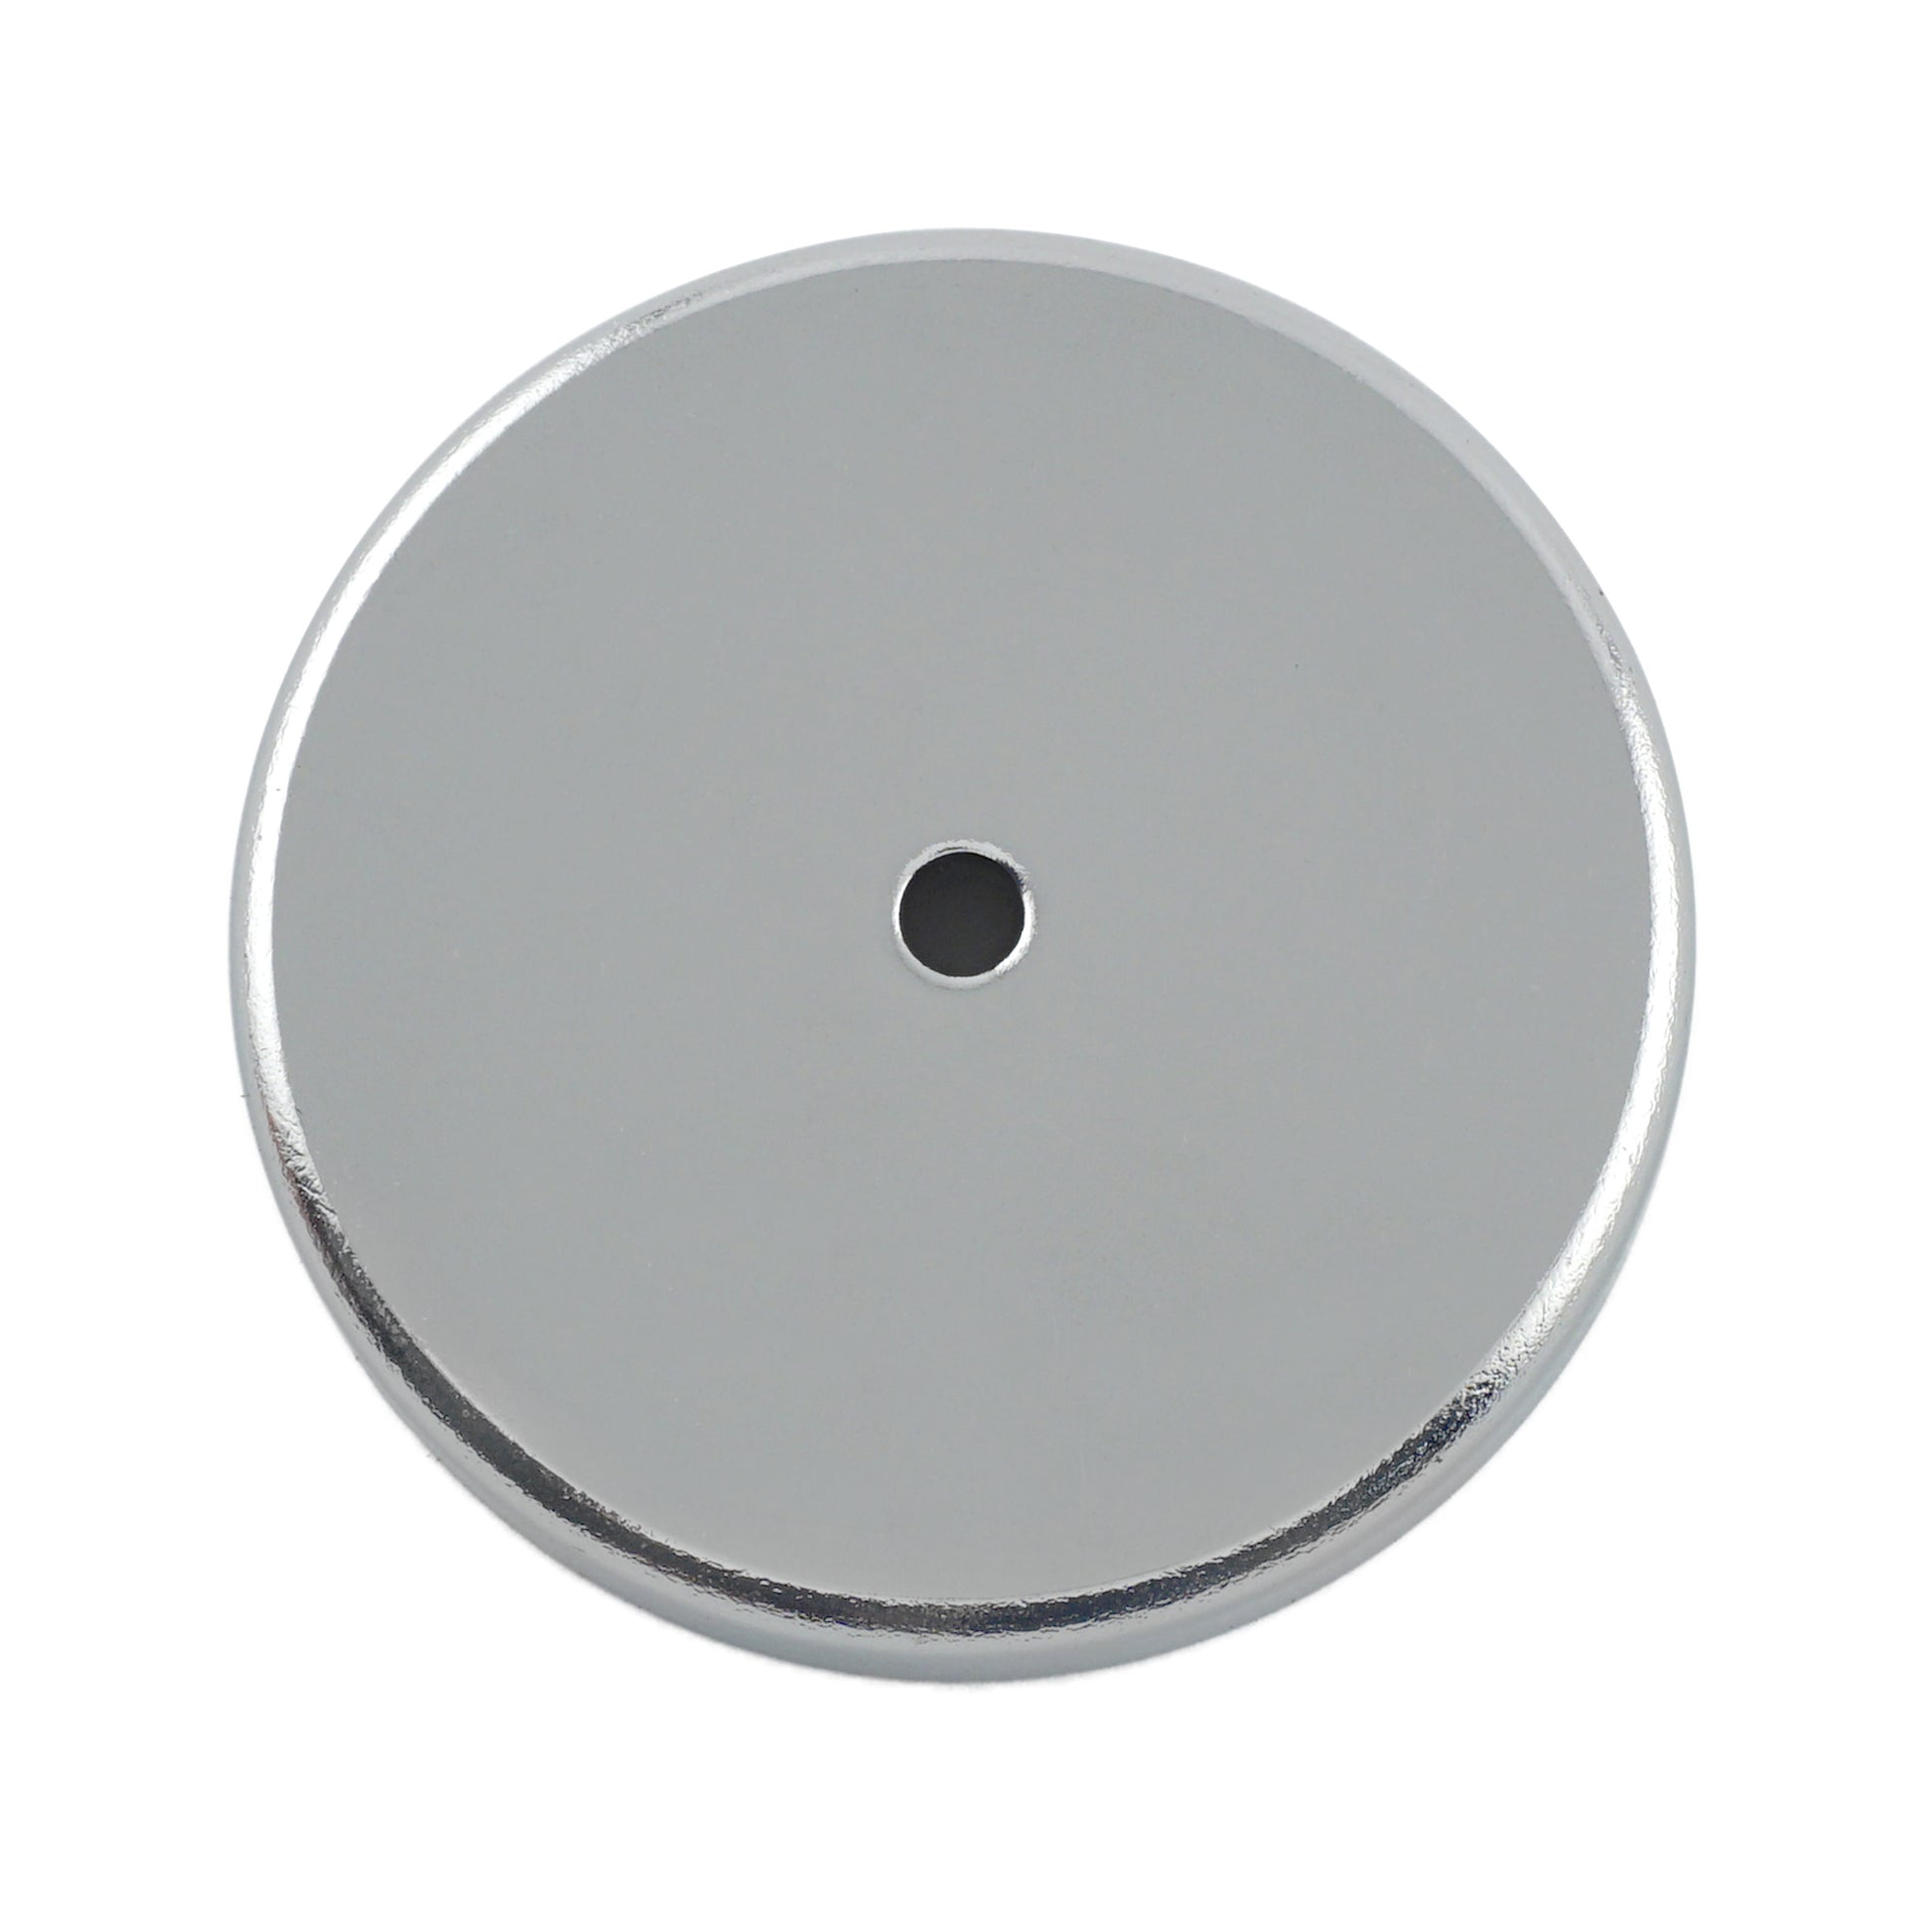 Load image into Gallery viewer, RB60C Ceramic Round Base Magnet - Bottom View